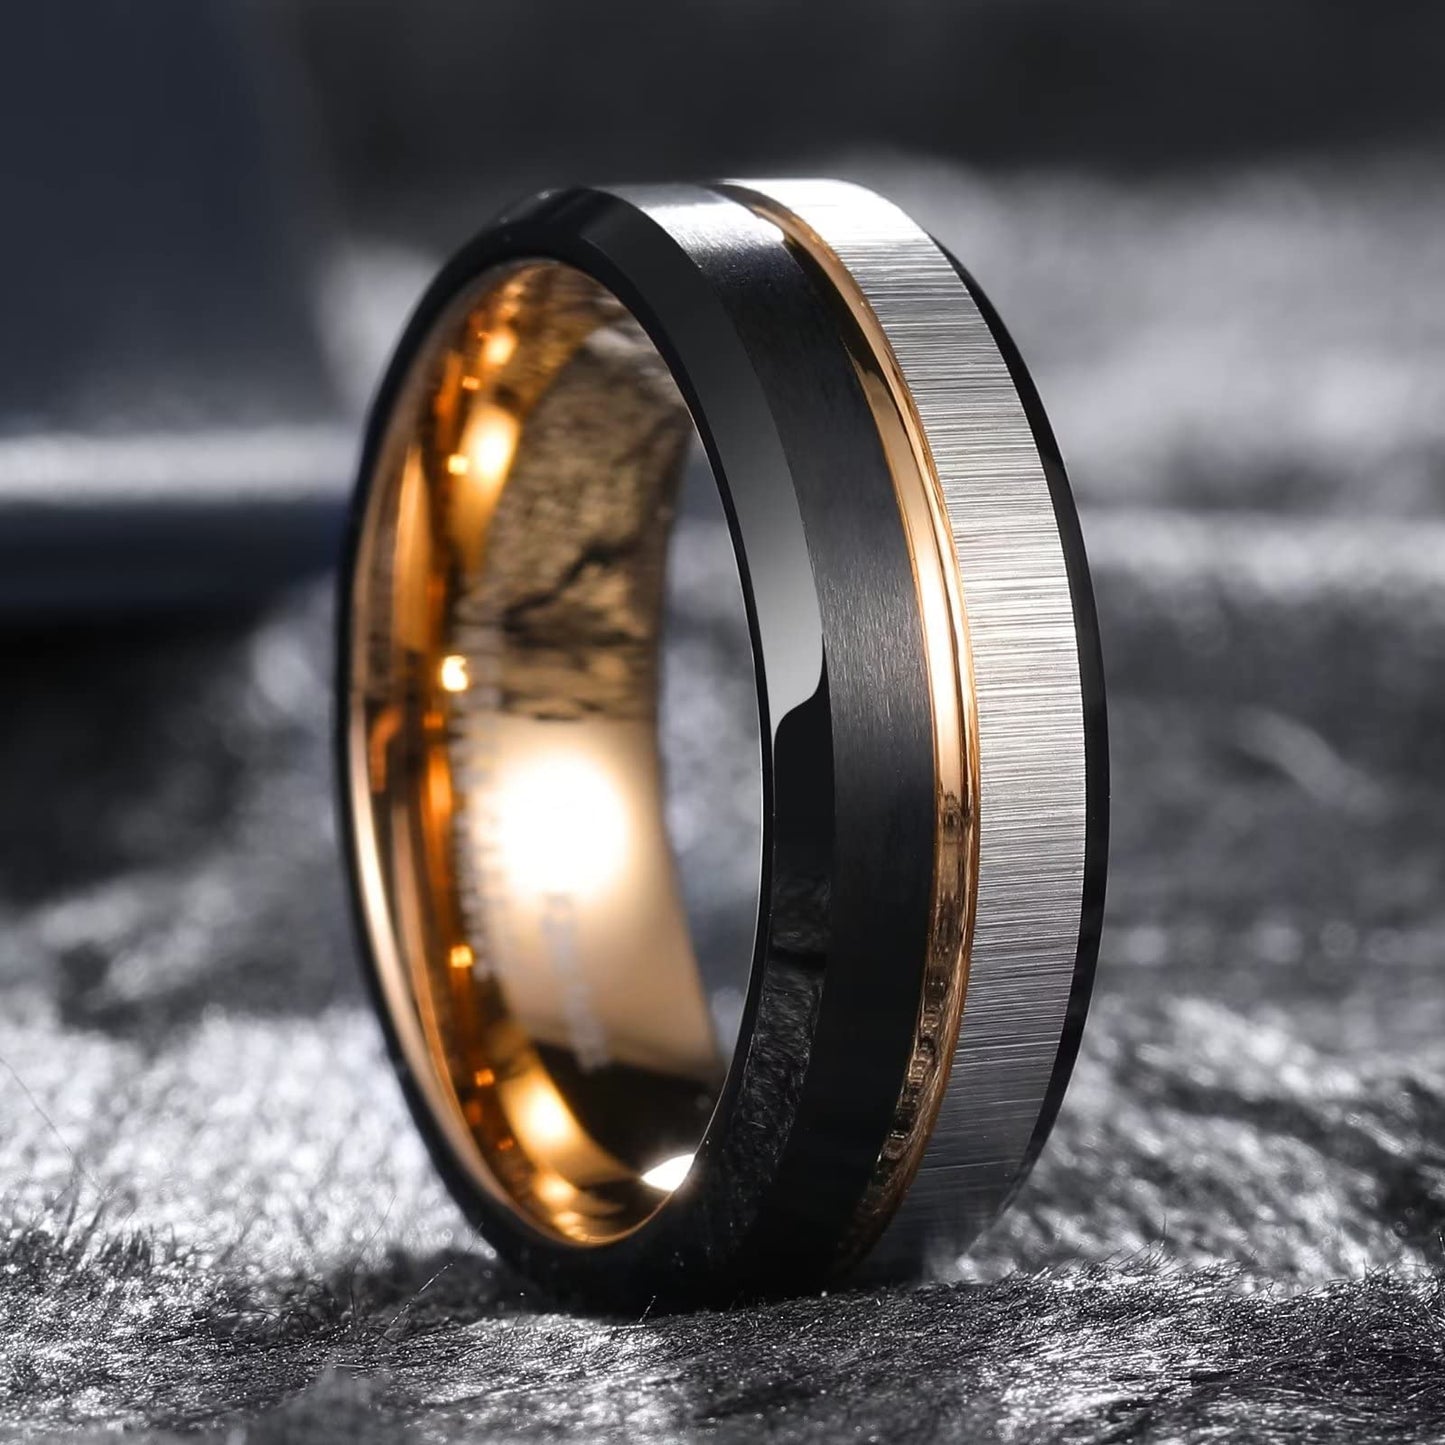 King Will Loop Tungsten Carbide Ring for Men Women Centre Rose Gold Groove Wedding Bands Surface Silver Transverse Stripes Brushed Finish And Black Matte Rose Gold Comfort Fit 9.5